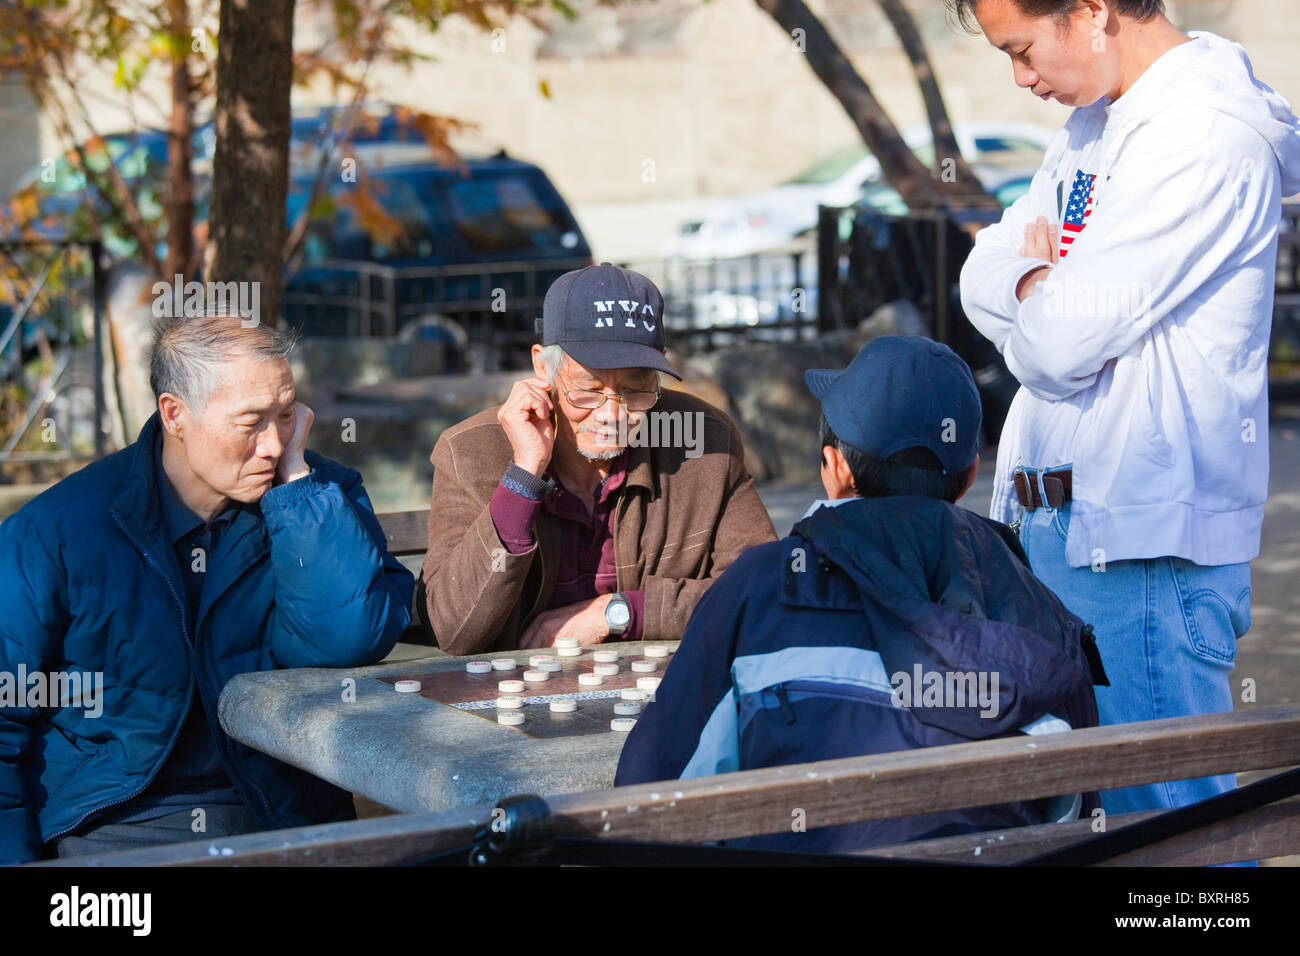 Chinese Americans playing Xiang qi, or Chinese chess in Columbus Park, Chinatown, New York City Stock Photo